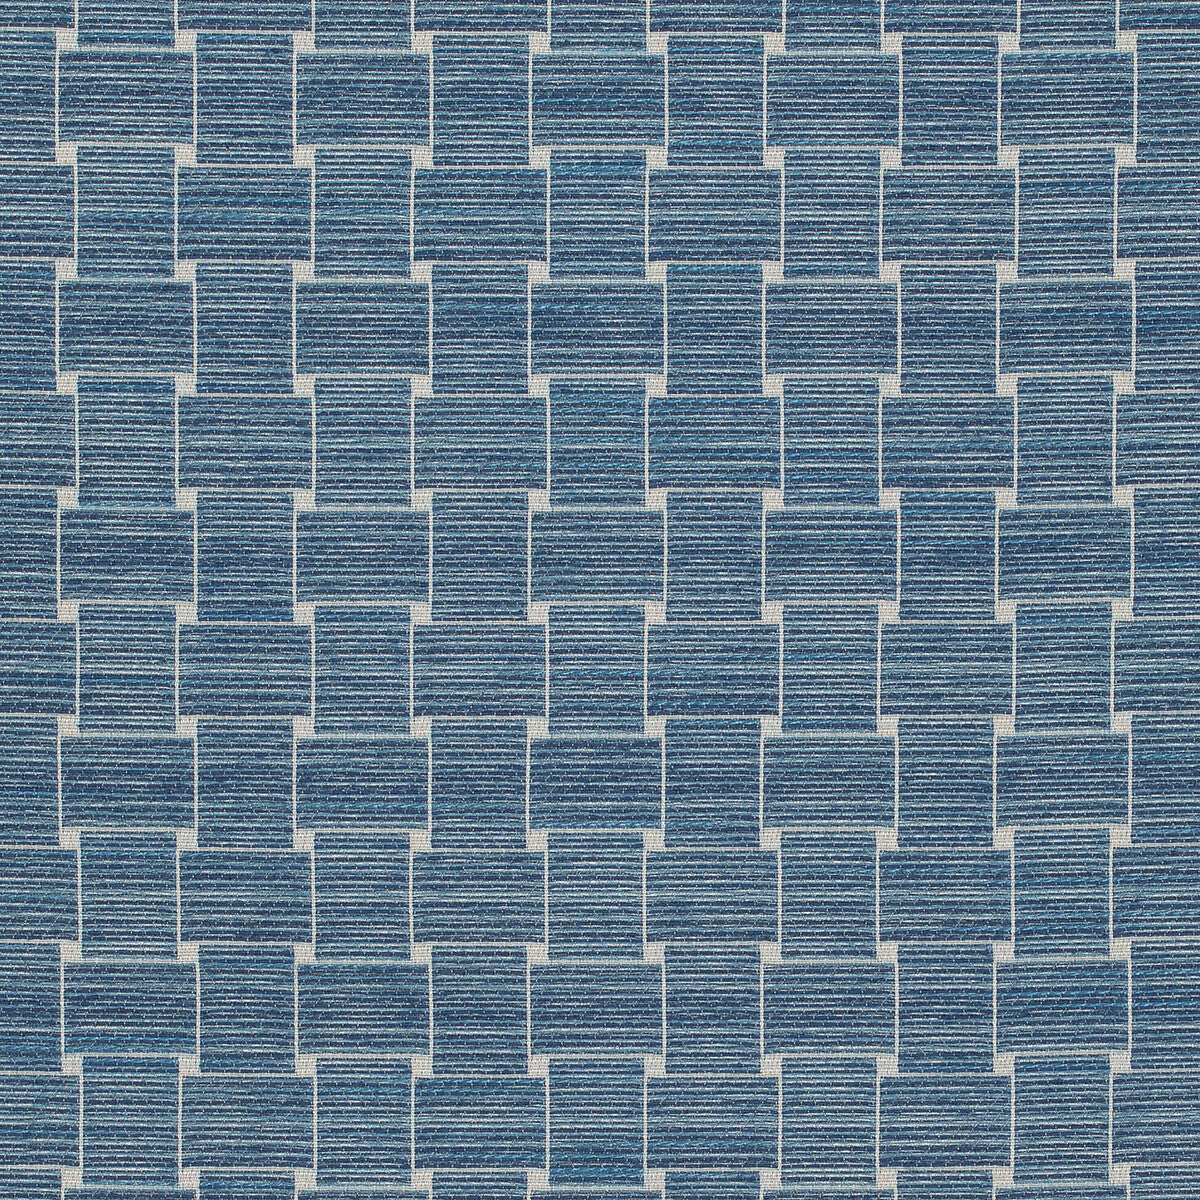 Beaumois Woven fabric in blue color - pattern 8020108.5.0 - by Brunschwig &amp; Fils in the Granville Weaves collection